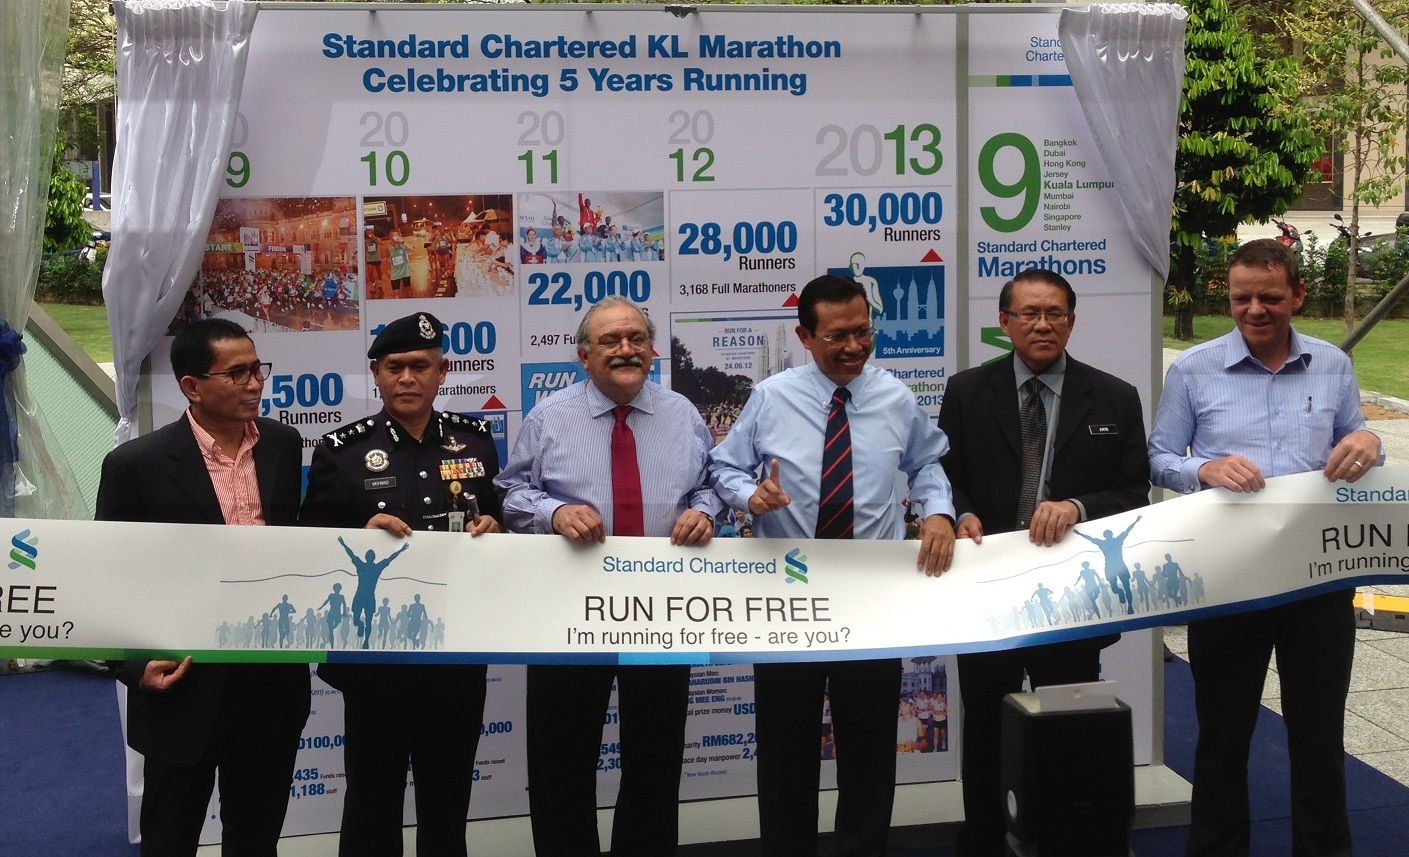 Standard Chartered KL Marathon 2013 announced the “Run-For-Free” Campaign